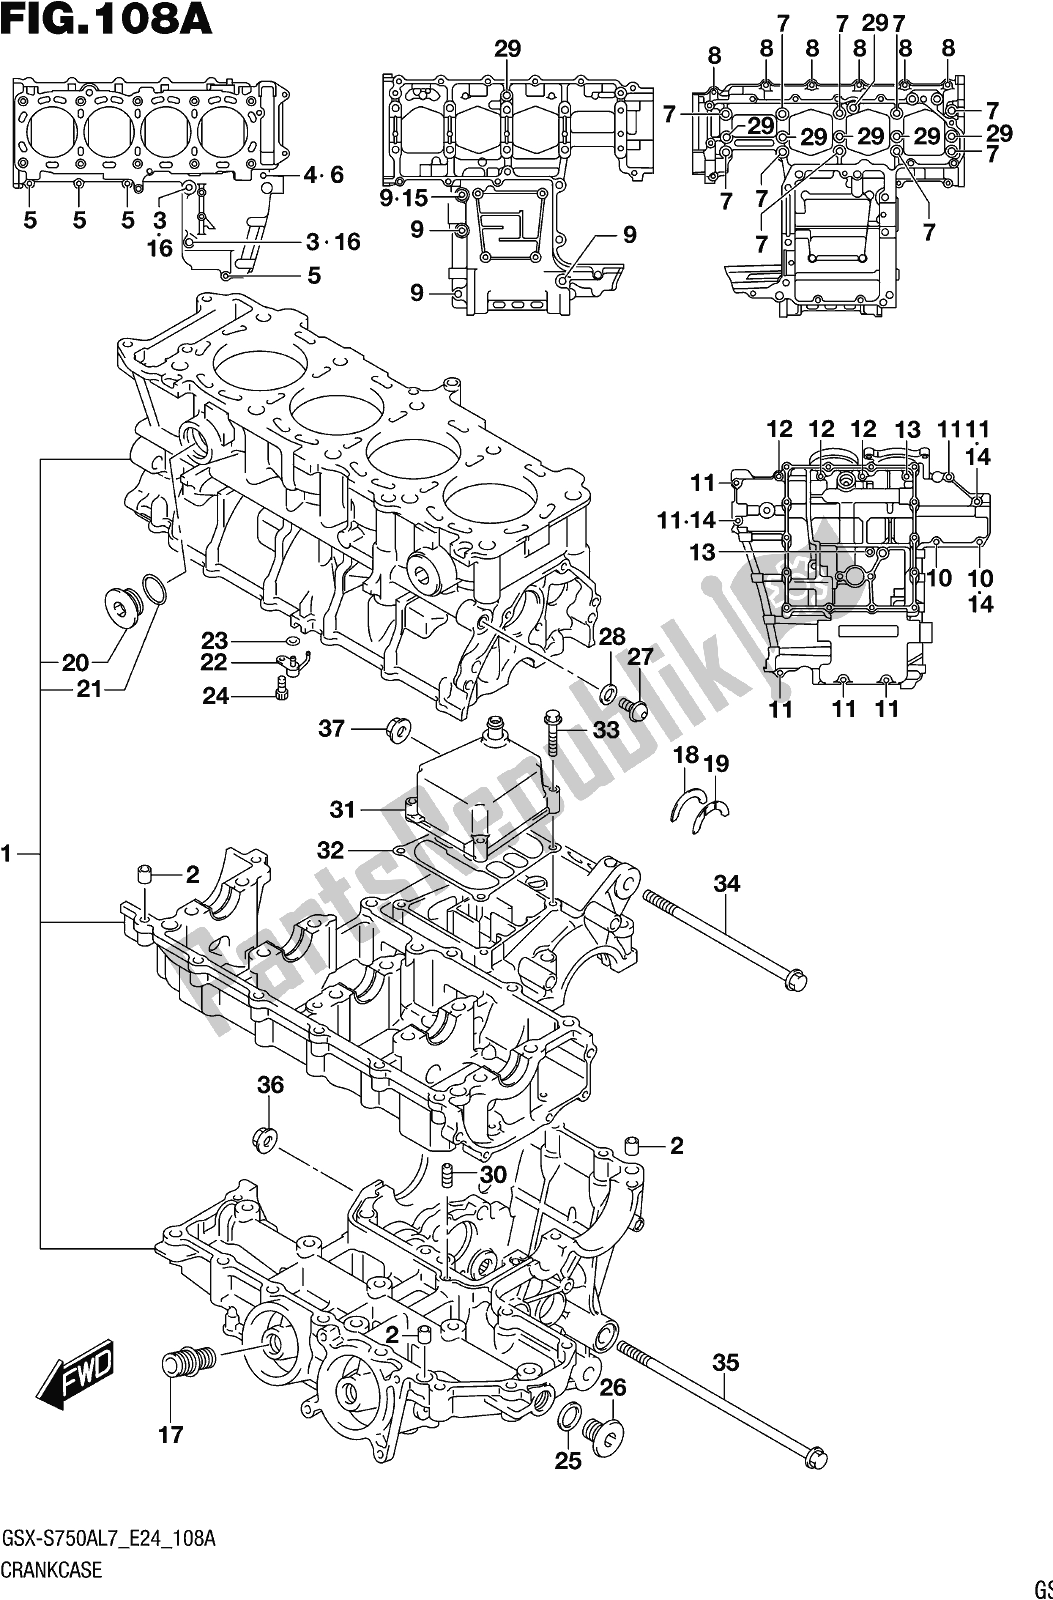 All parts for the Fig. 108a Crankcase of the Suzuki Gsx-s 750 AZ 2017